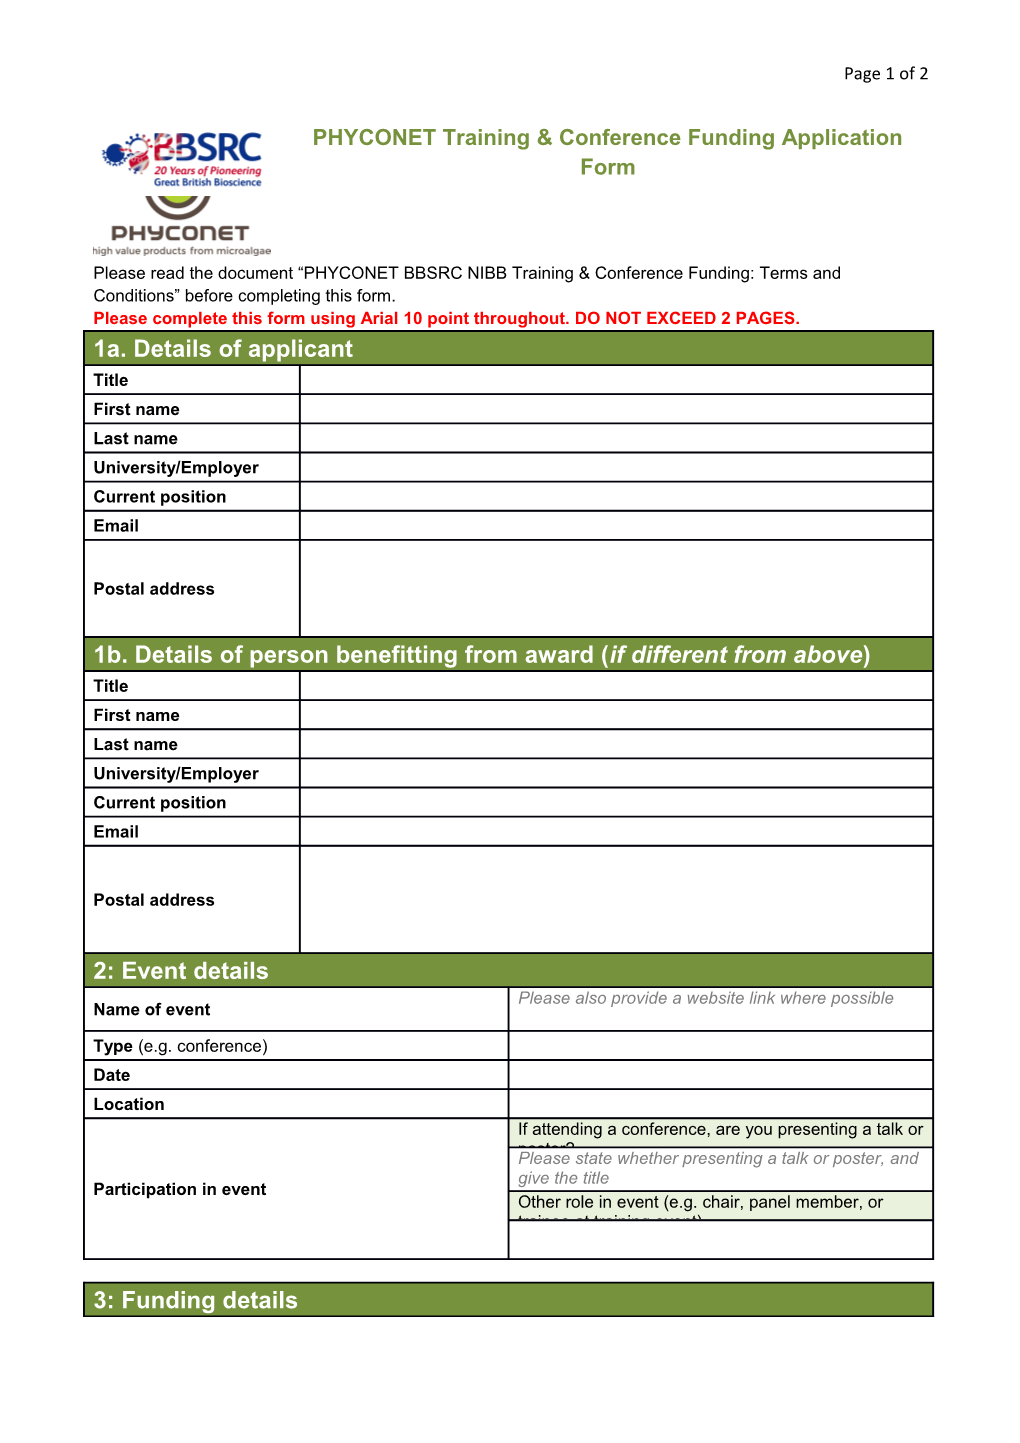 Please Complete This Form Using Arial 10 Point Throughout.DO NOT EXCEED 2 PAGES